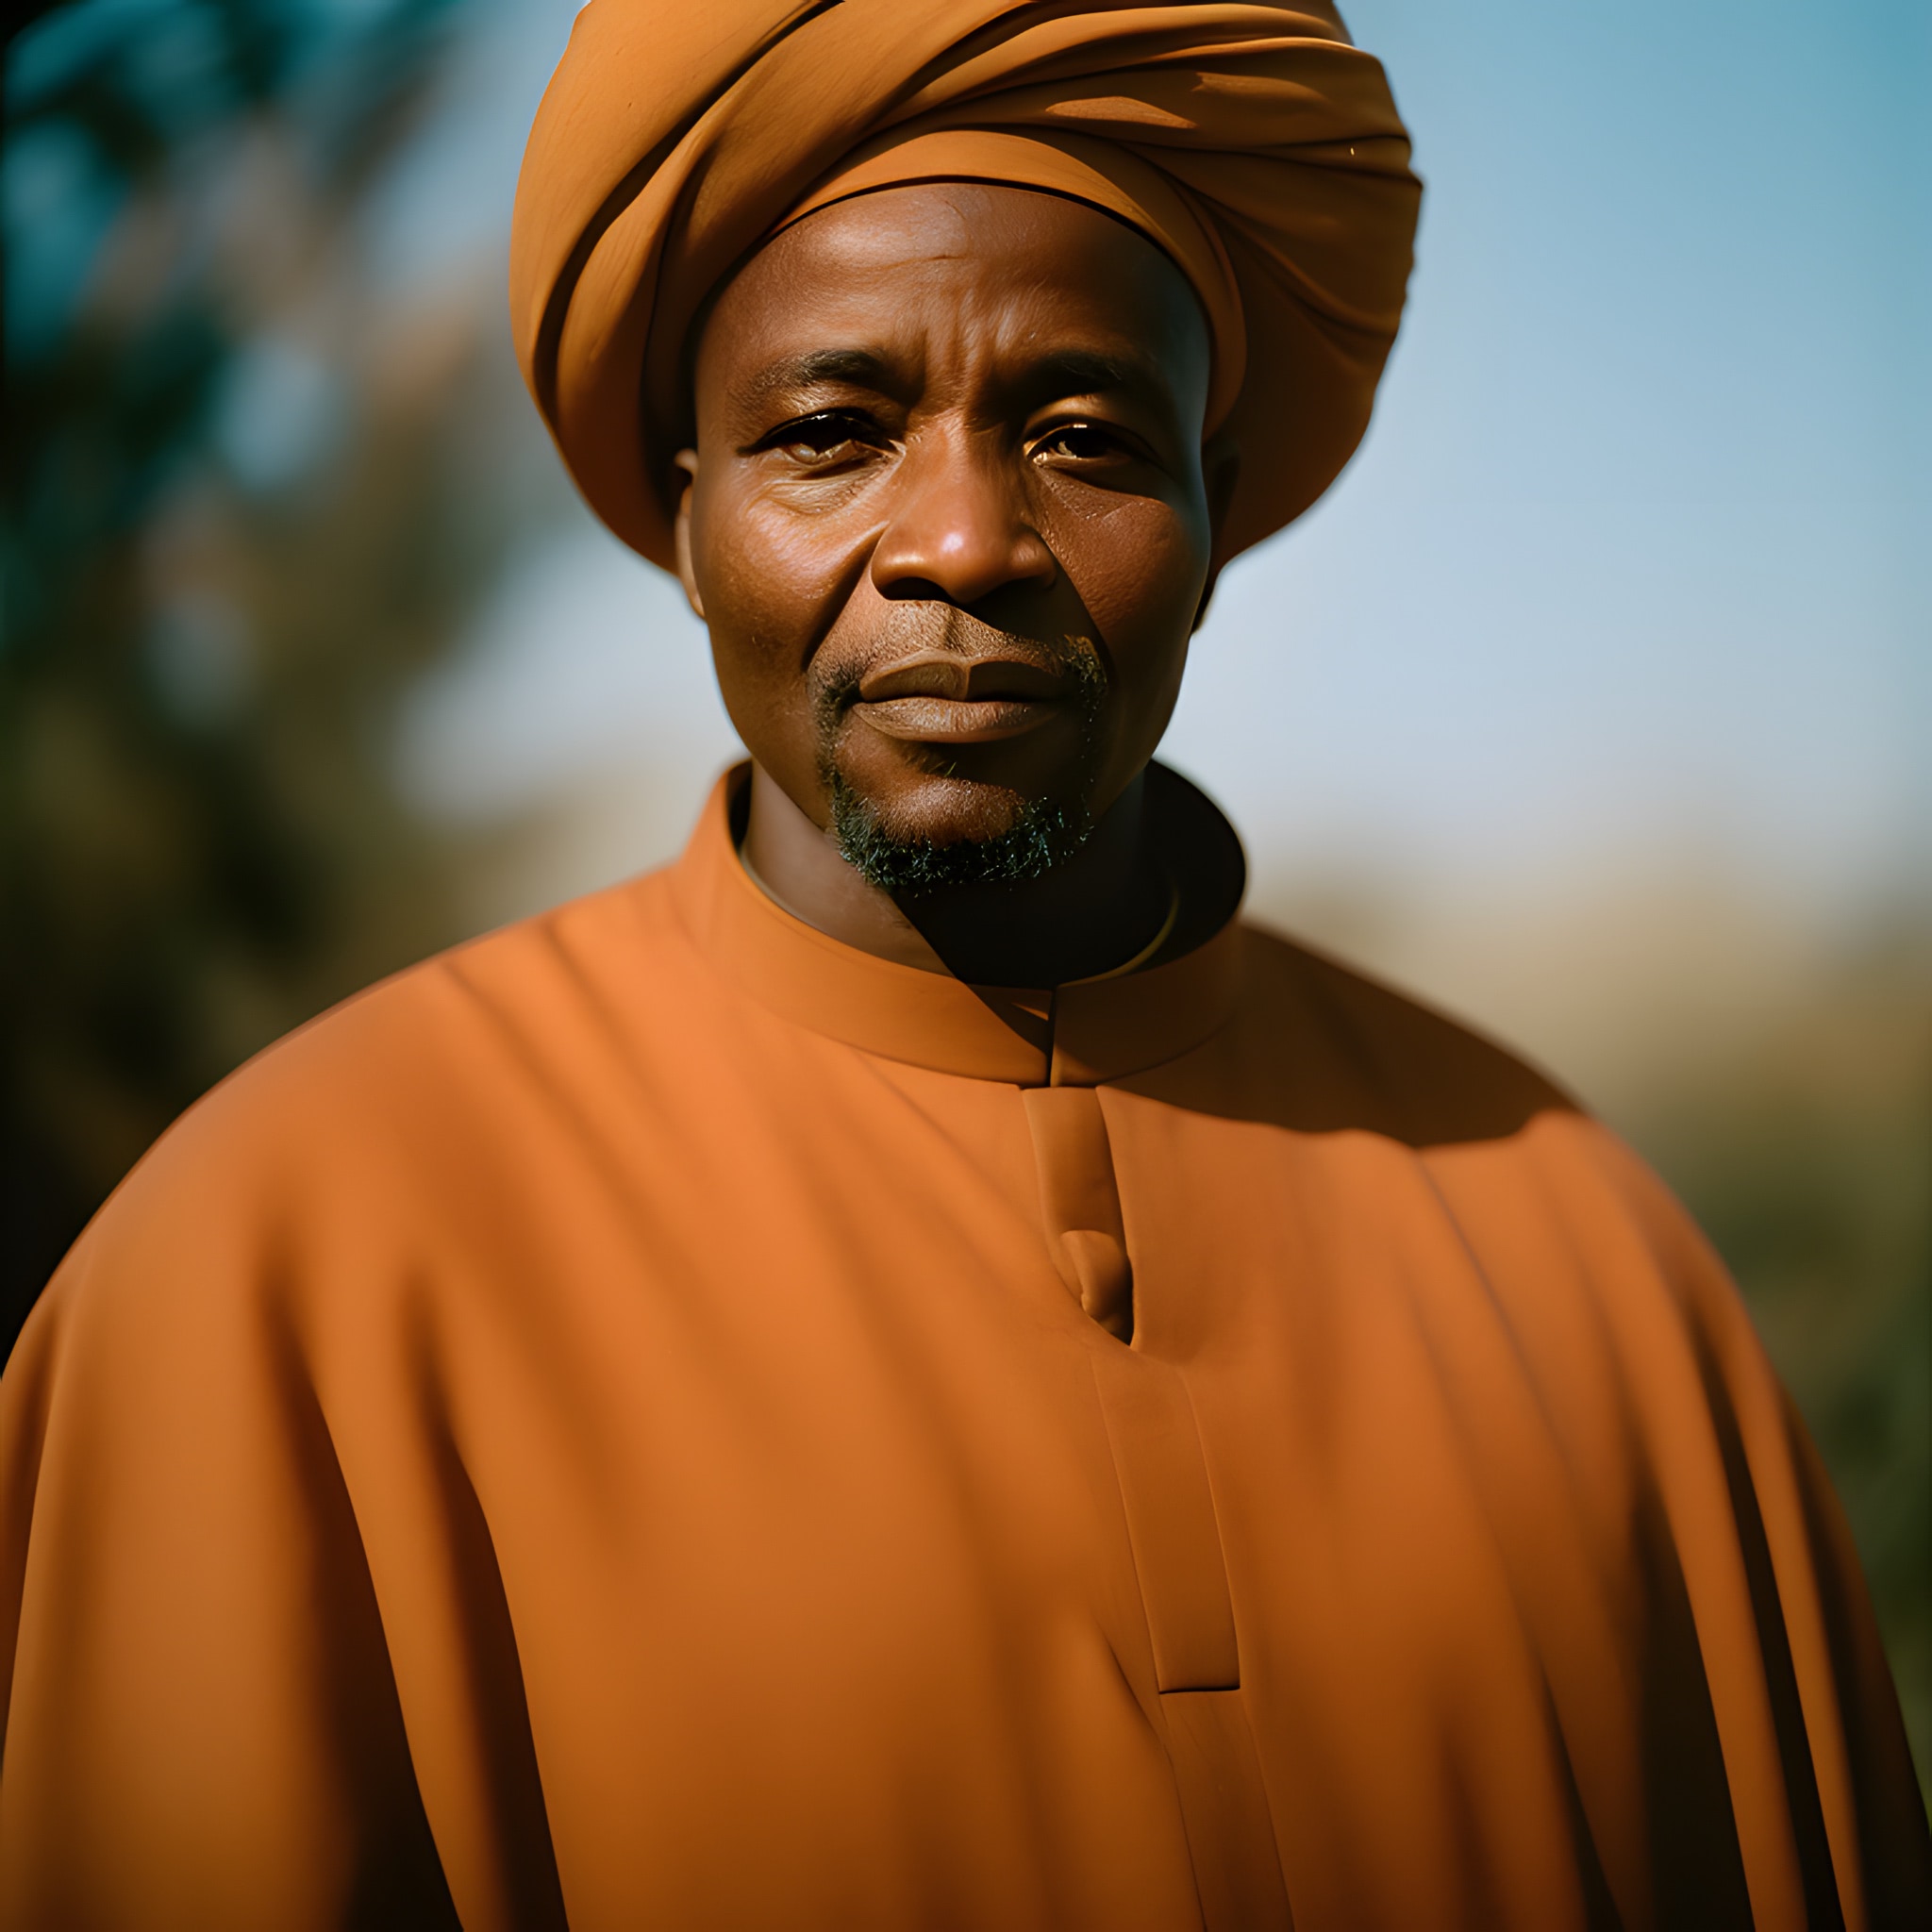 Photo-taken-on-a-Hasselblad-camera-African-priest-af6b